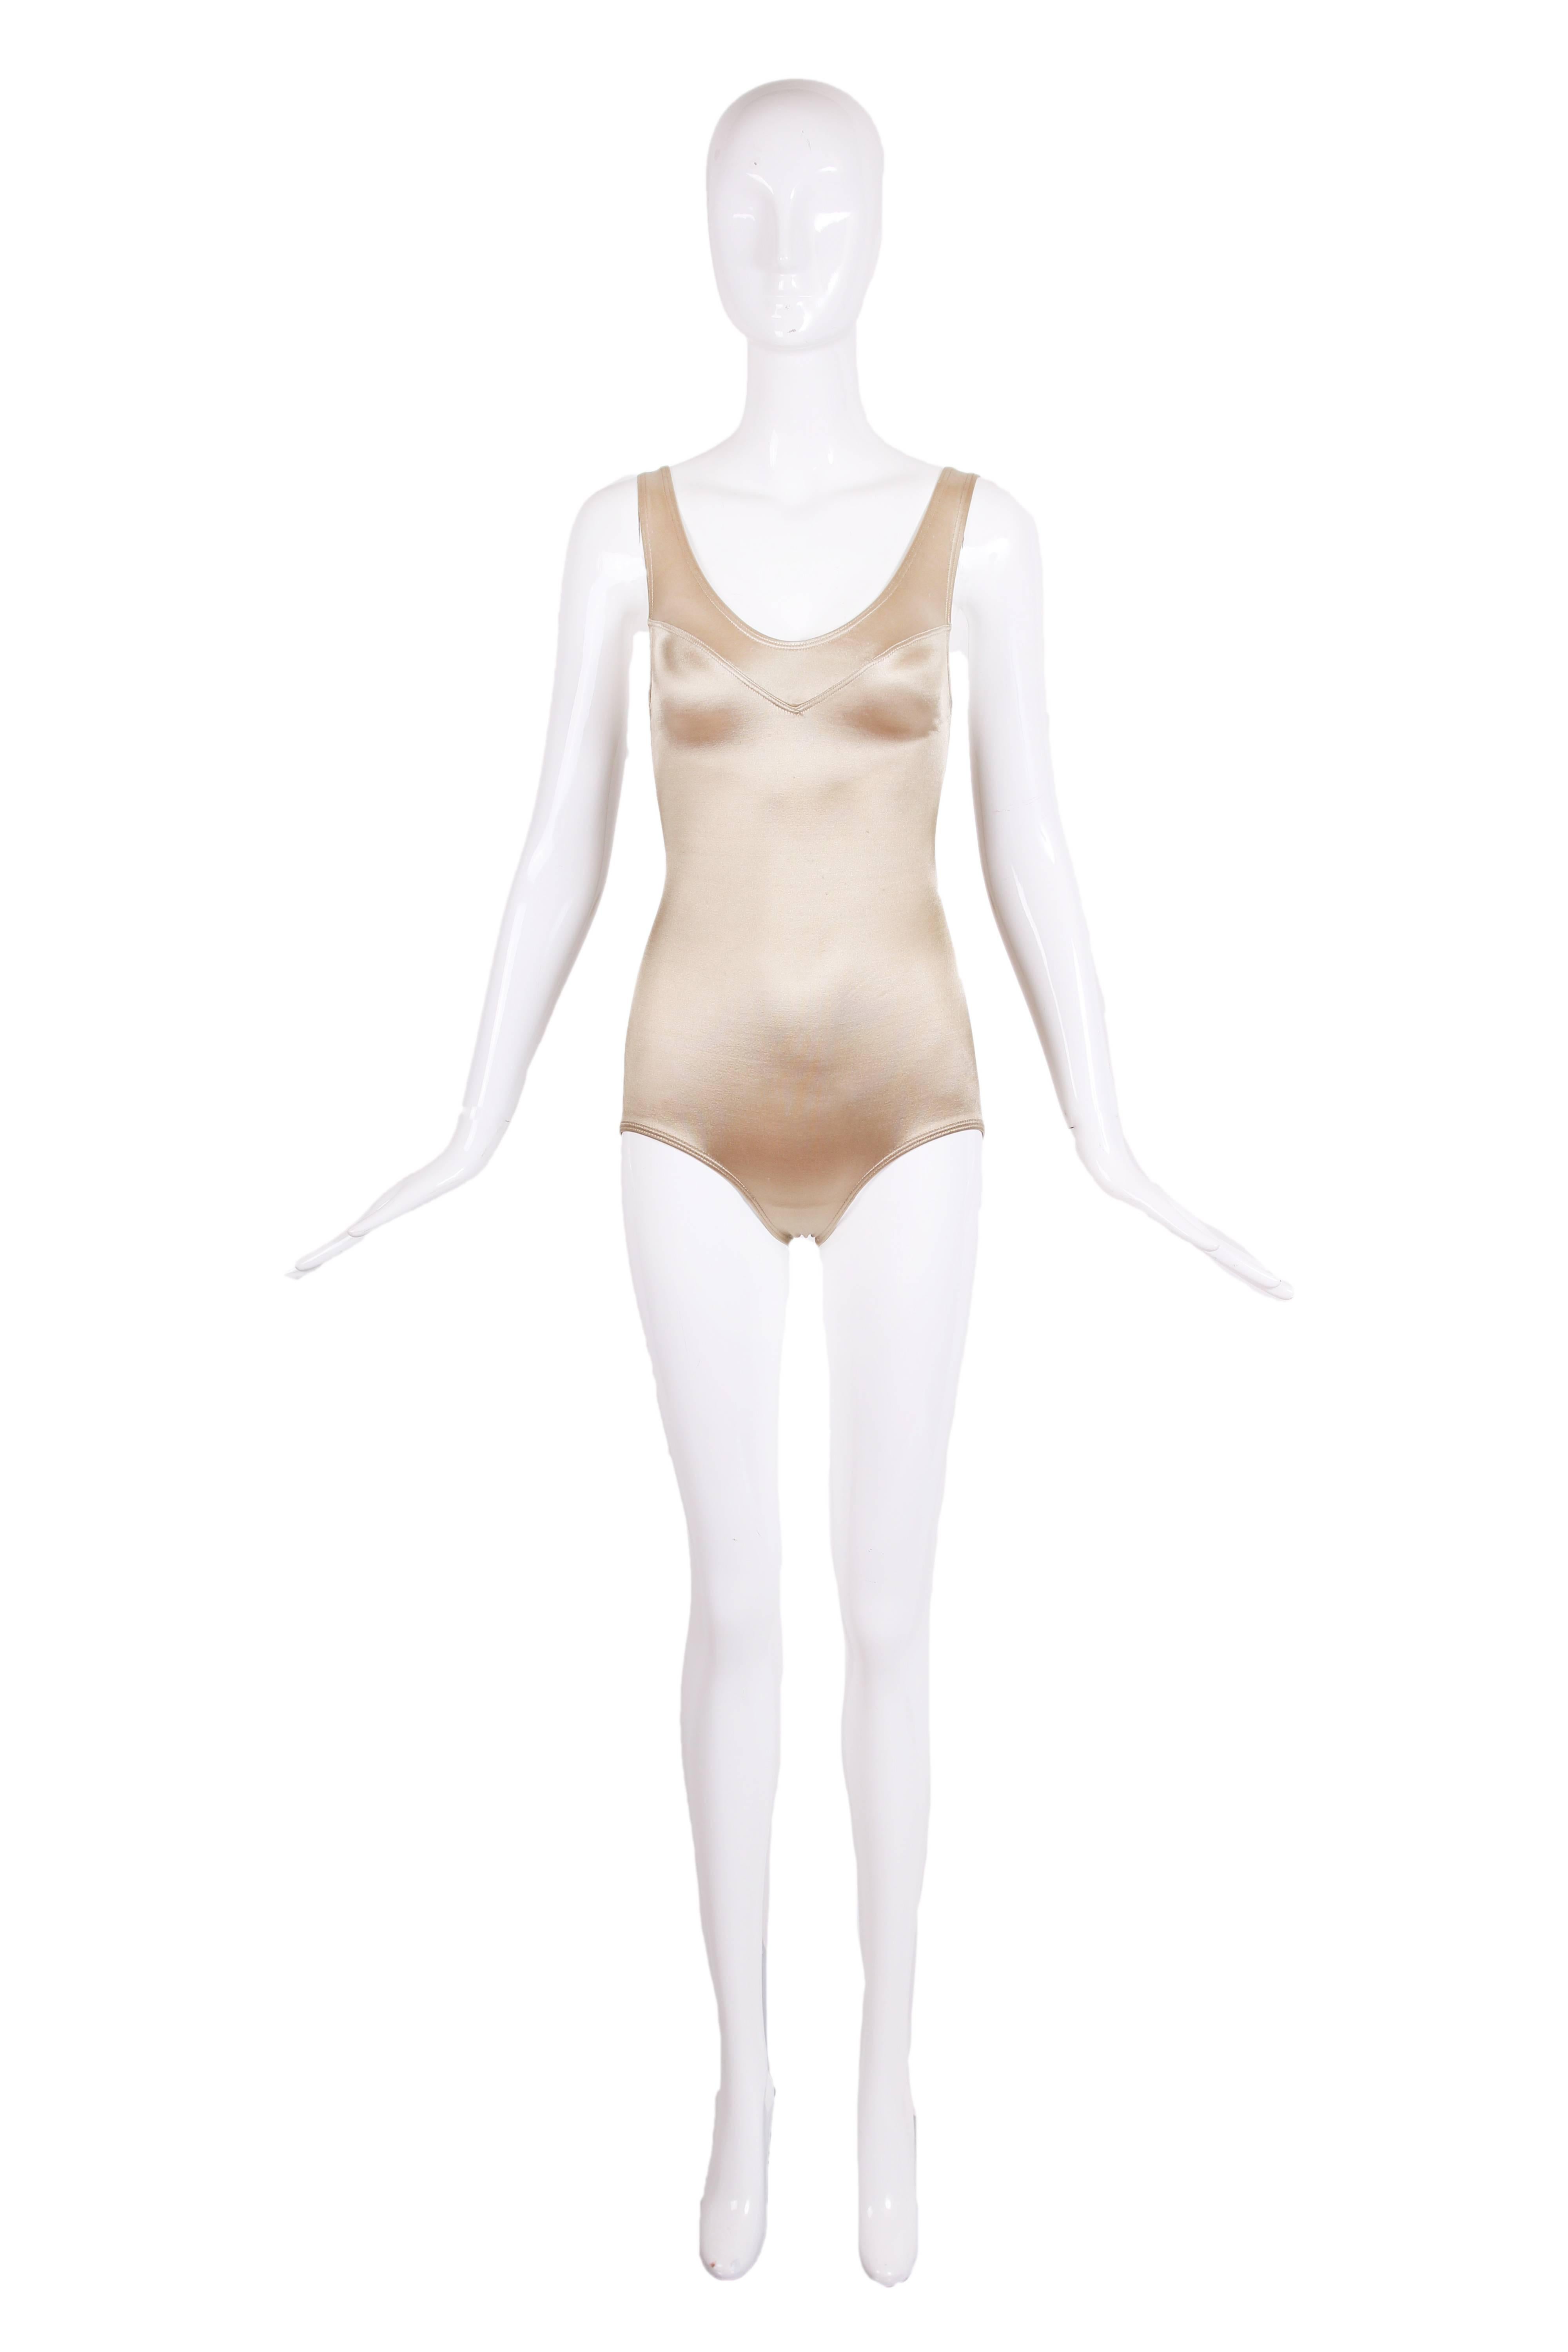 Vintage Azzedine Alaia champagne colored satin stretch one-piece bathing suit. In excellent condition - appears to have never been worn. Very small - most likely will fit a size 2.